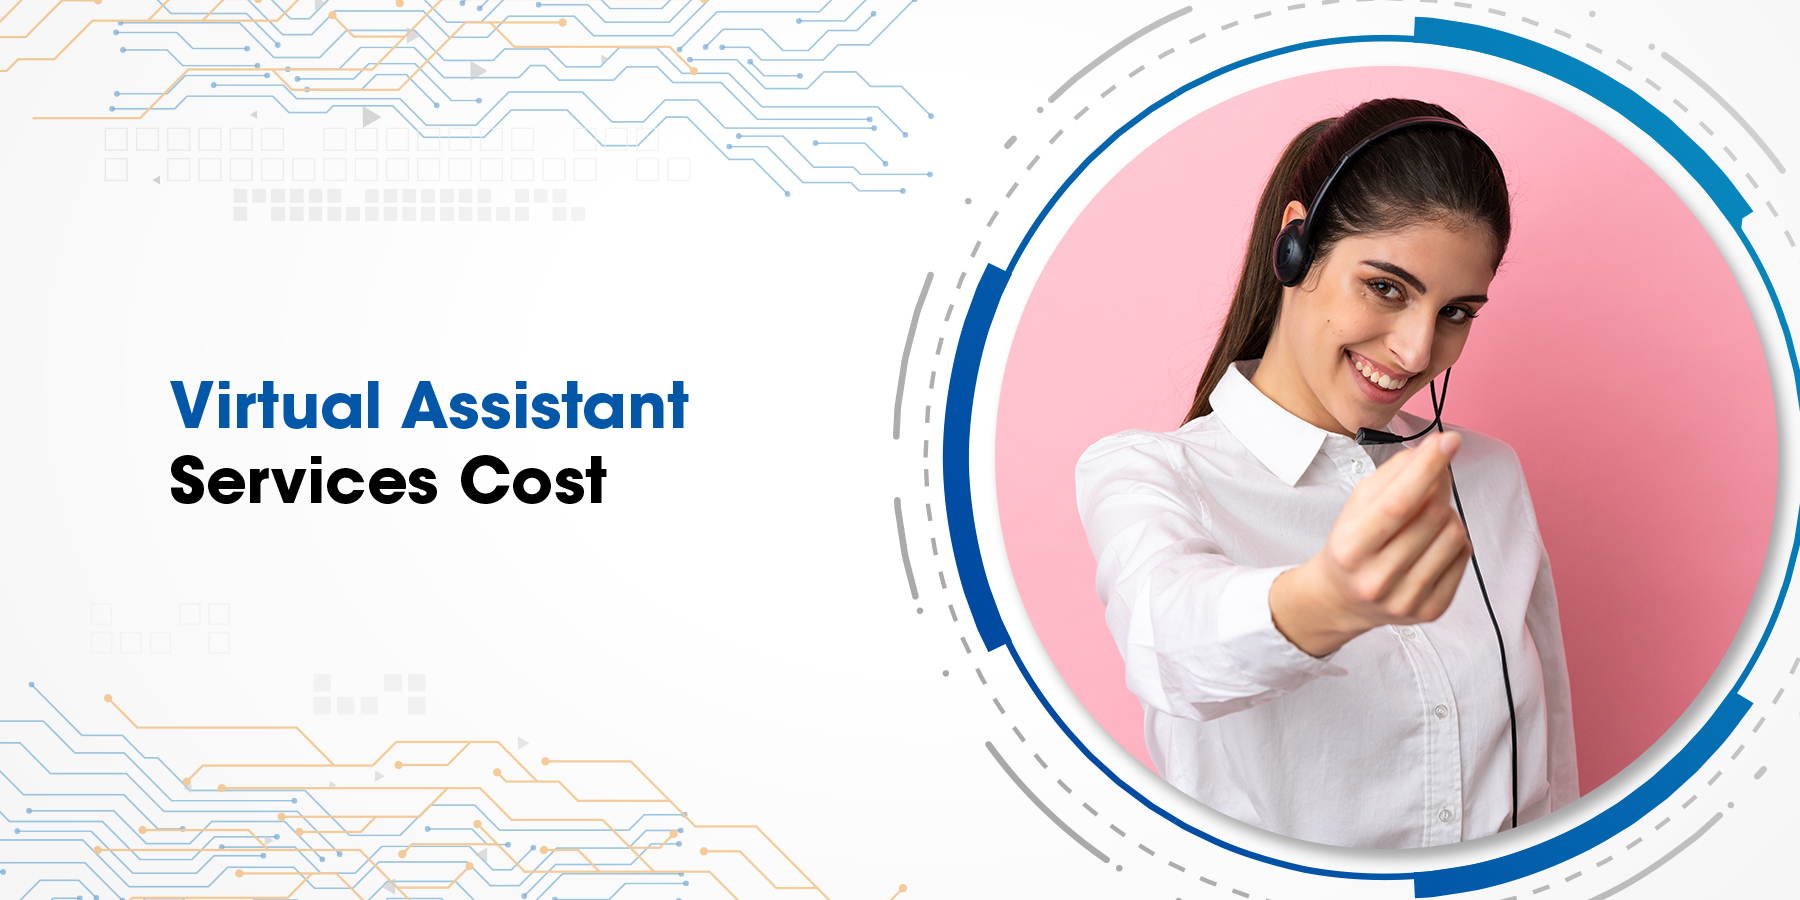 How Much Does It Cost To Hire A Virtual Assistant in 202